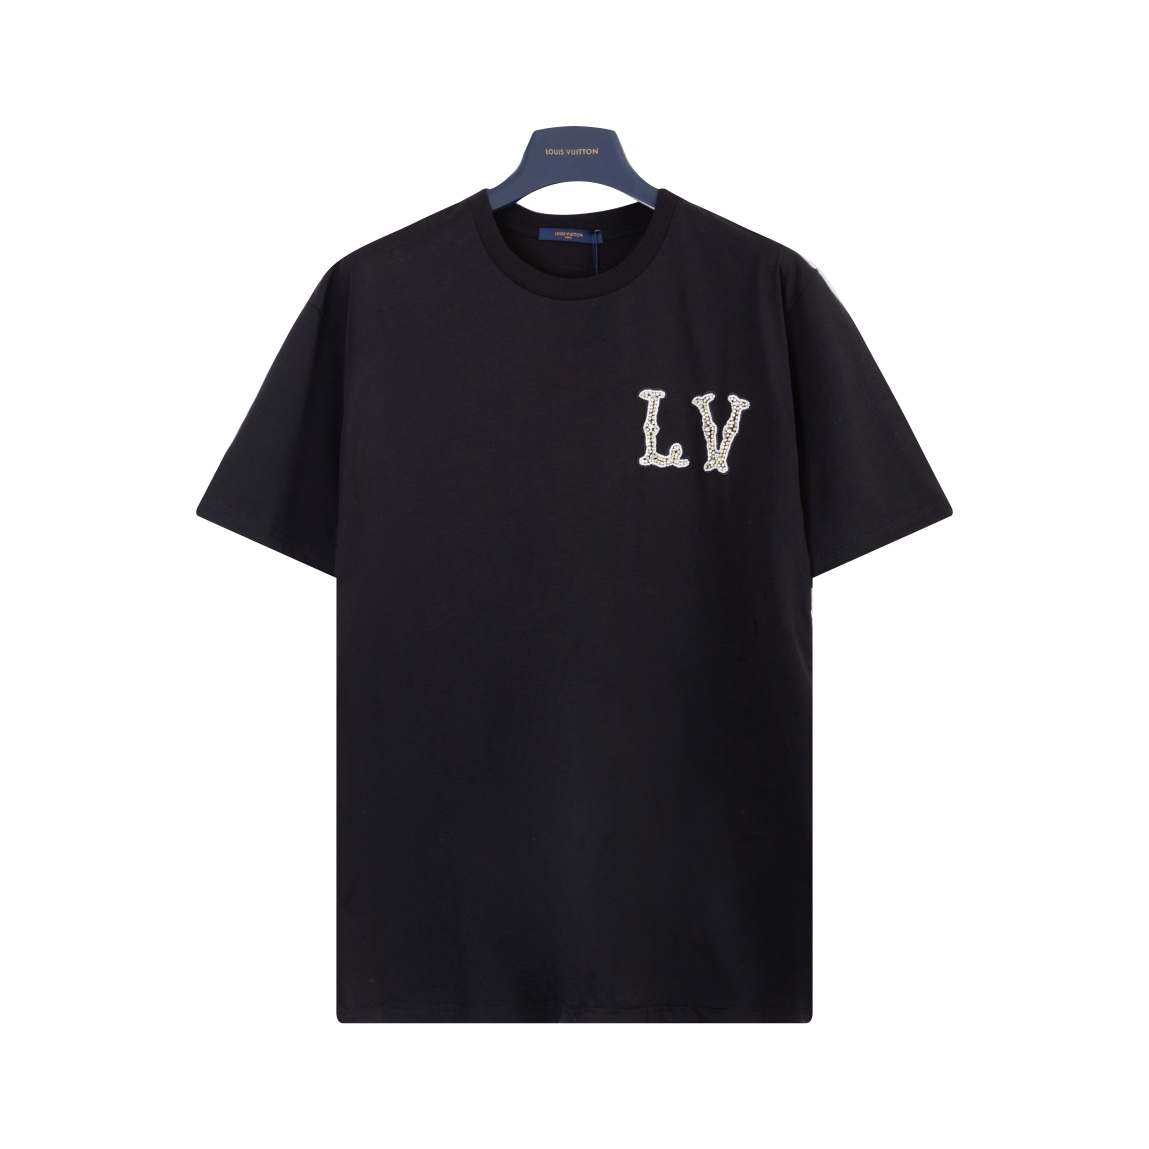 Louis Vuitton Clothing T-Shirt Black Embroidery Unisex Cotton Spring/Summer Collection Short Sleeve